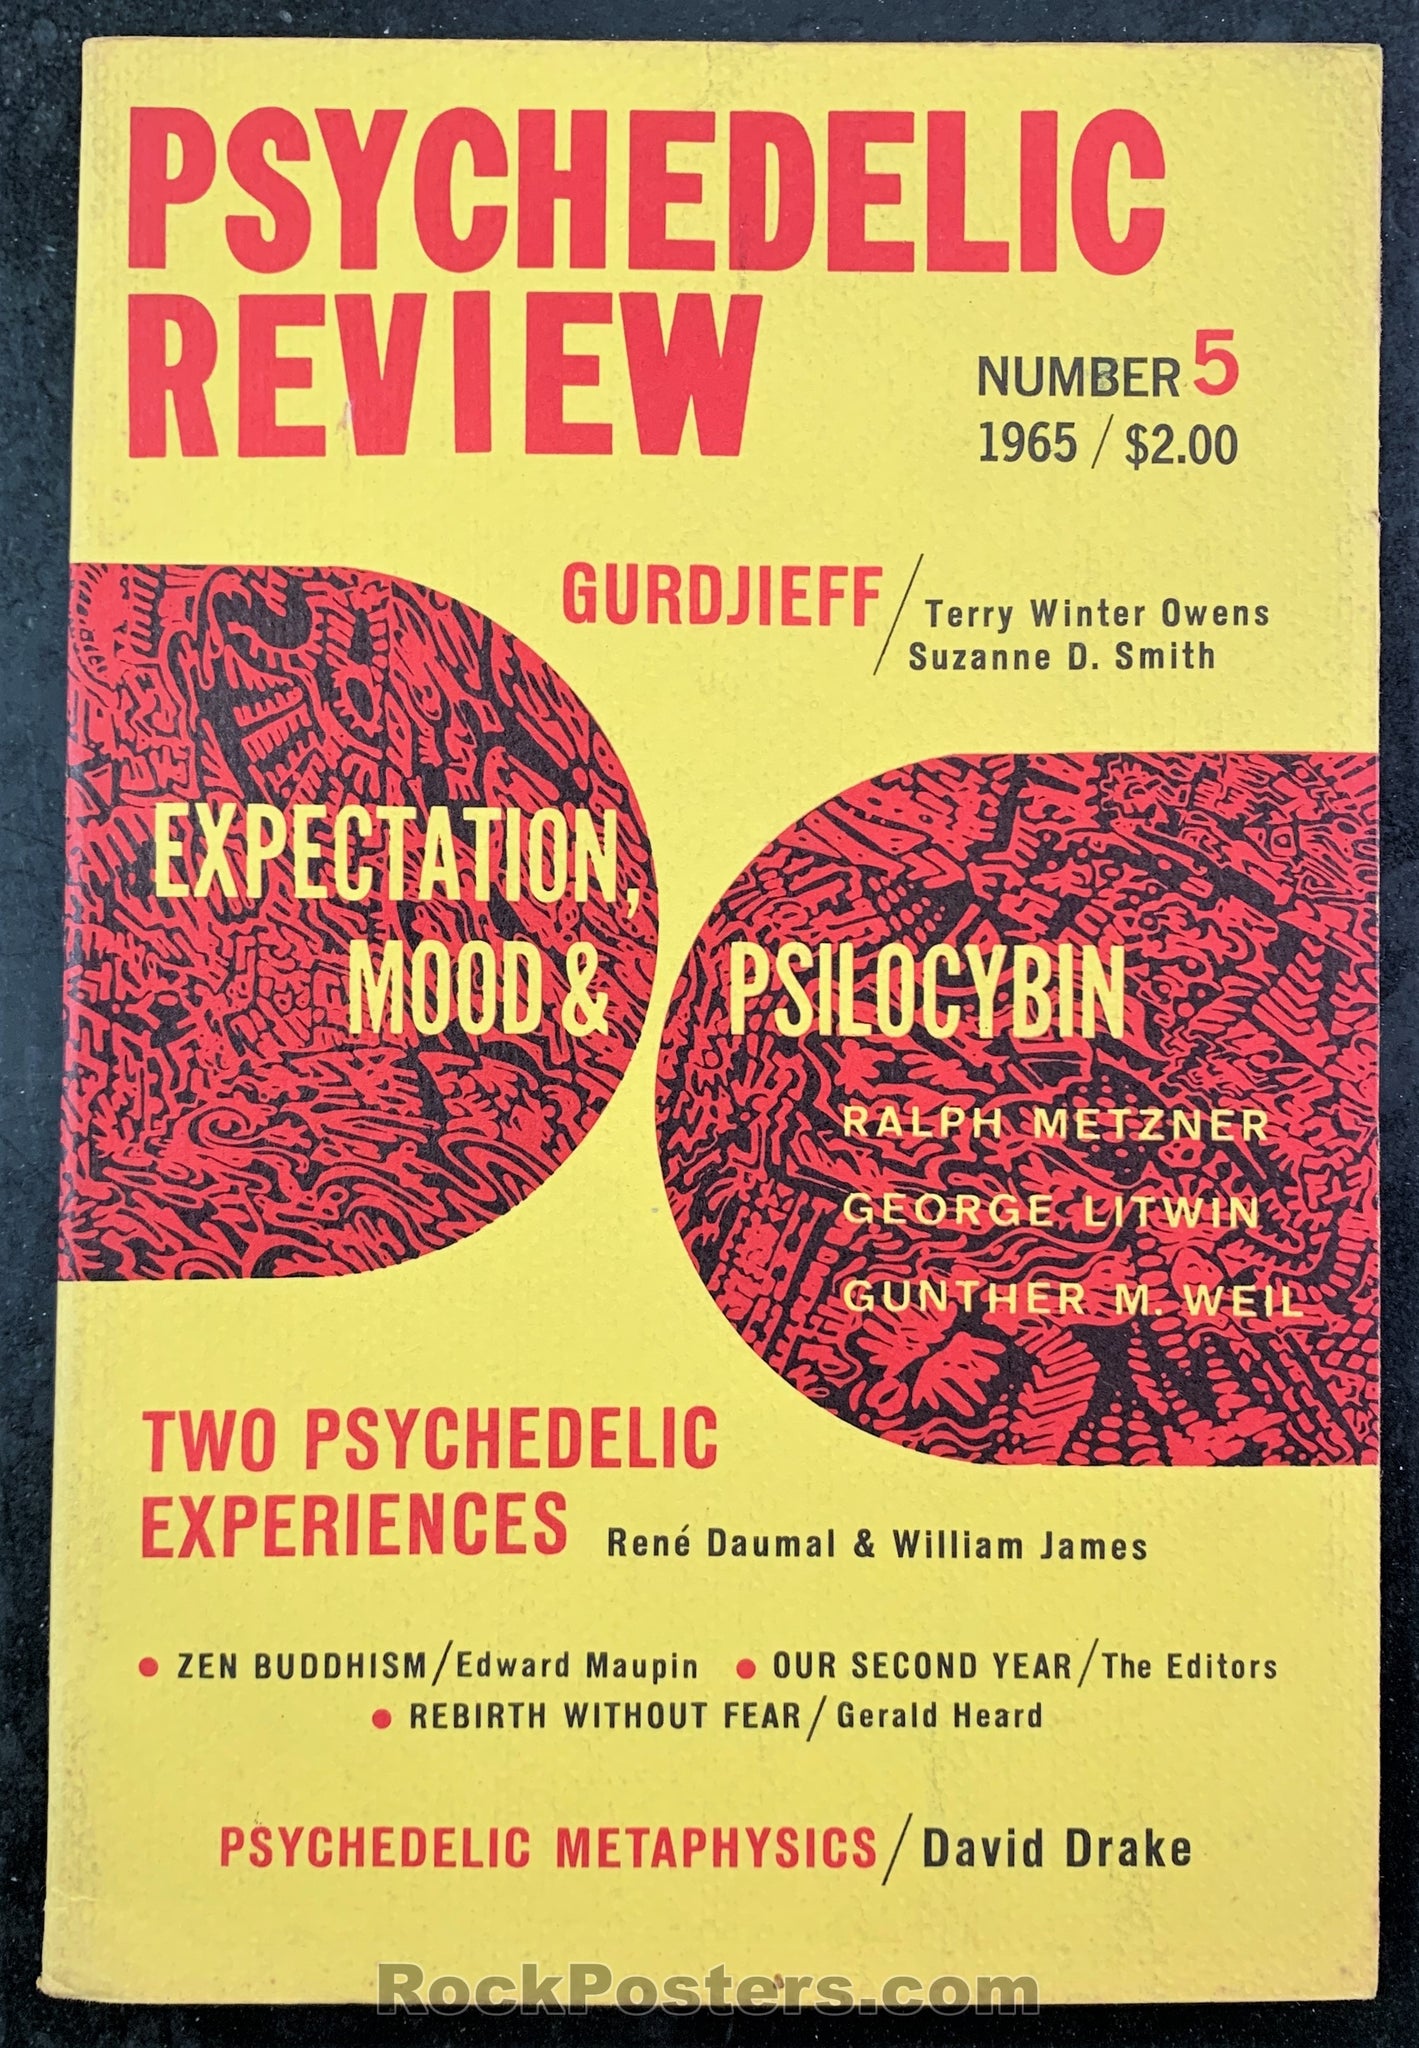 AUCTION - The Psychedelic Review #5 - Mushrooms Zen Buddhism - 1965 Journal - Near Mint Minus